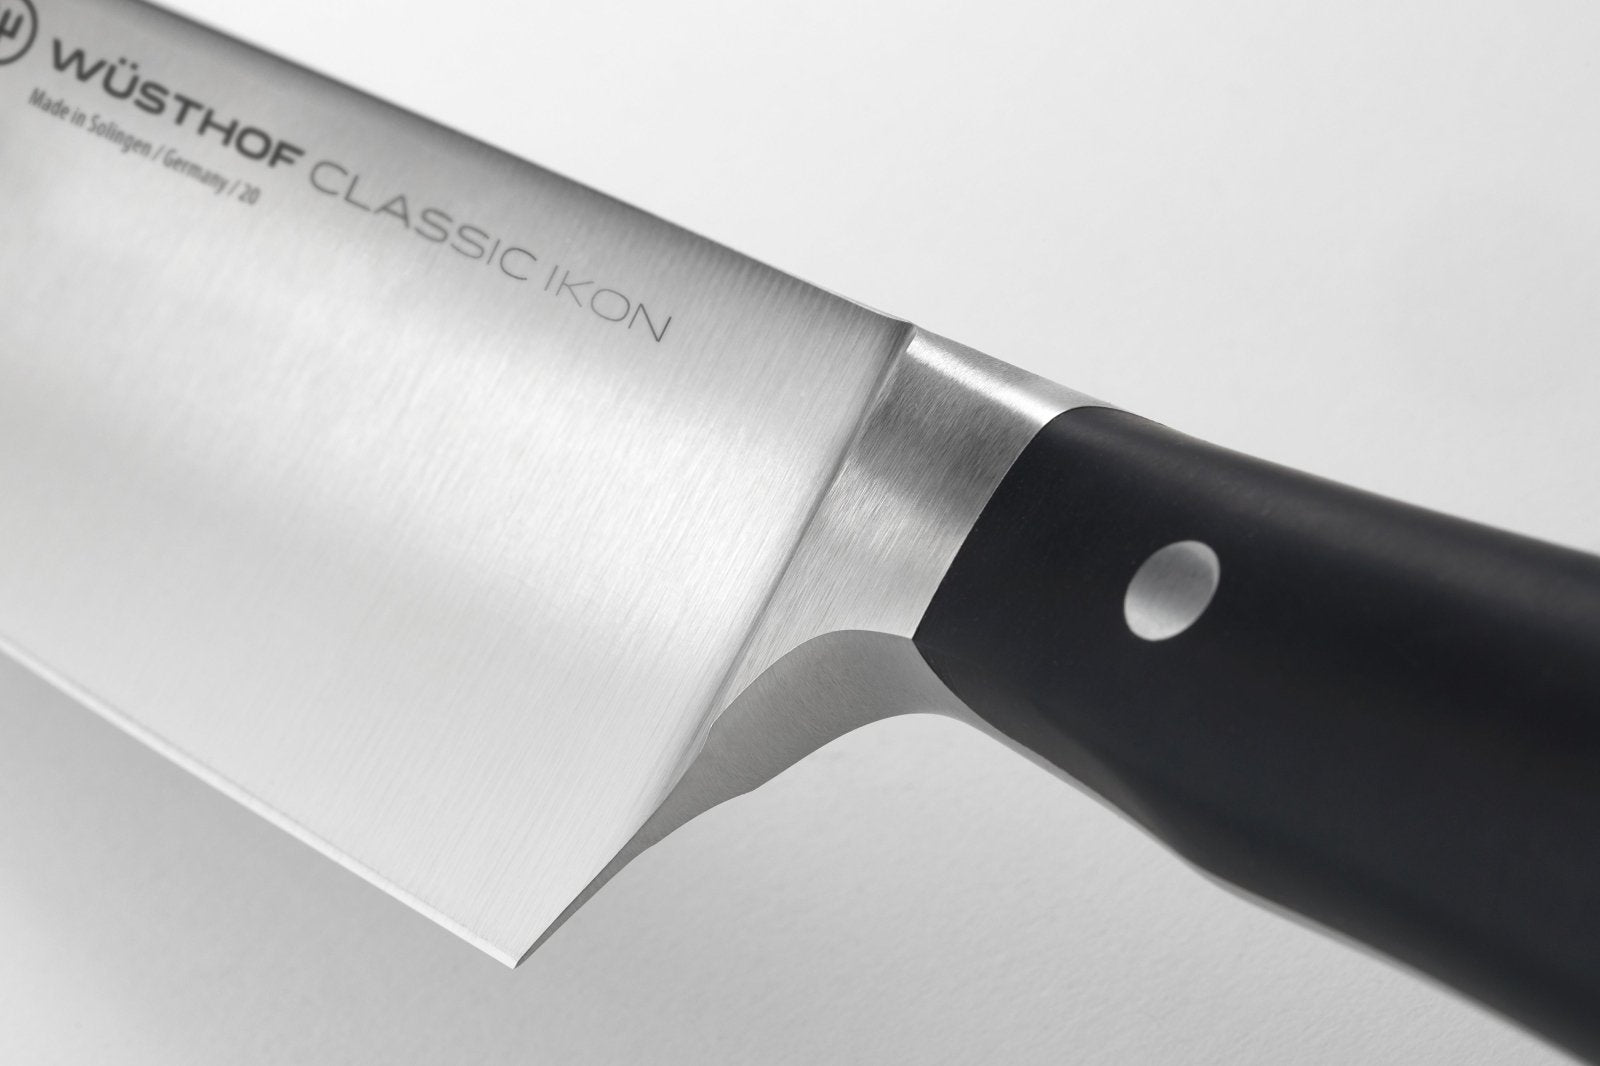 Wusthof Classic IKON 20cm Carving Knife - WT1040330720 - The Cotswold Knife Company